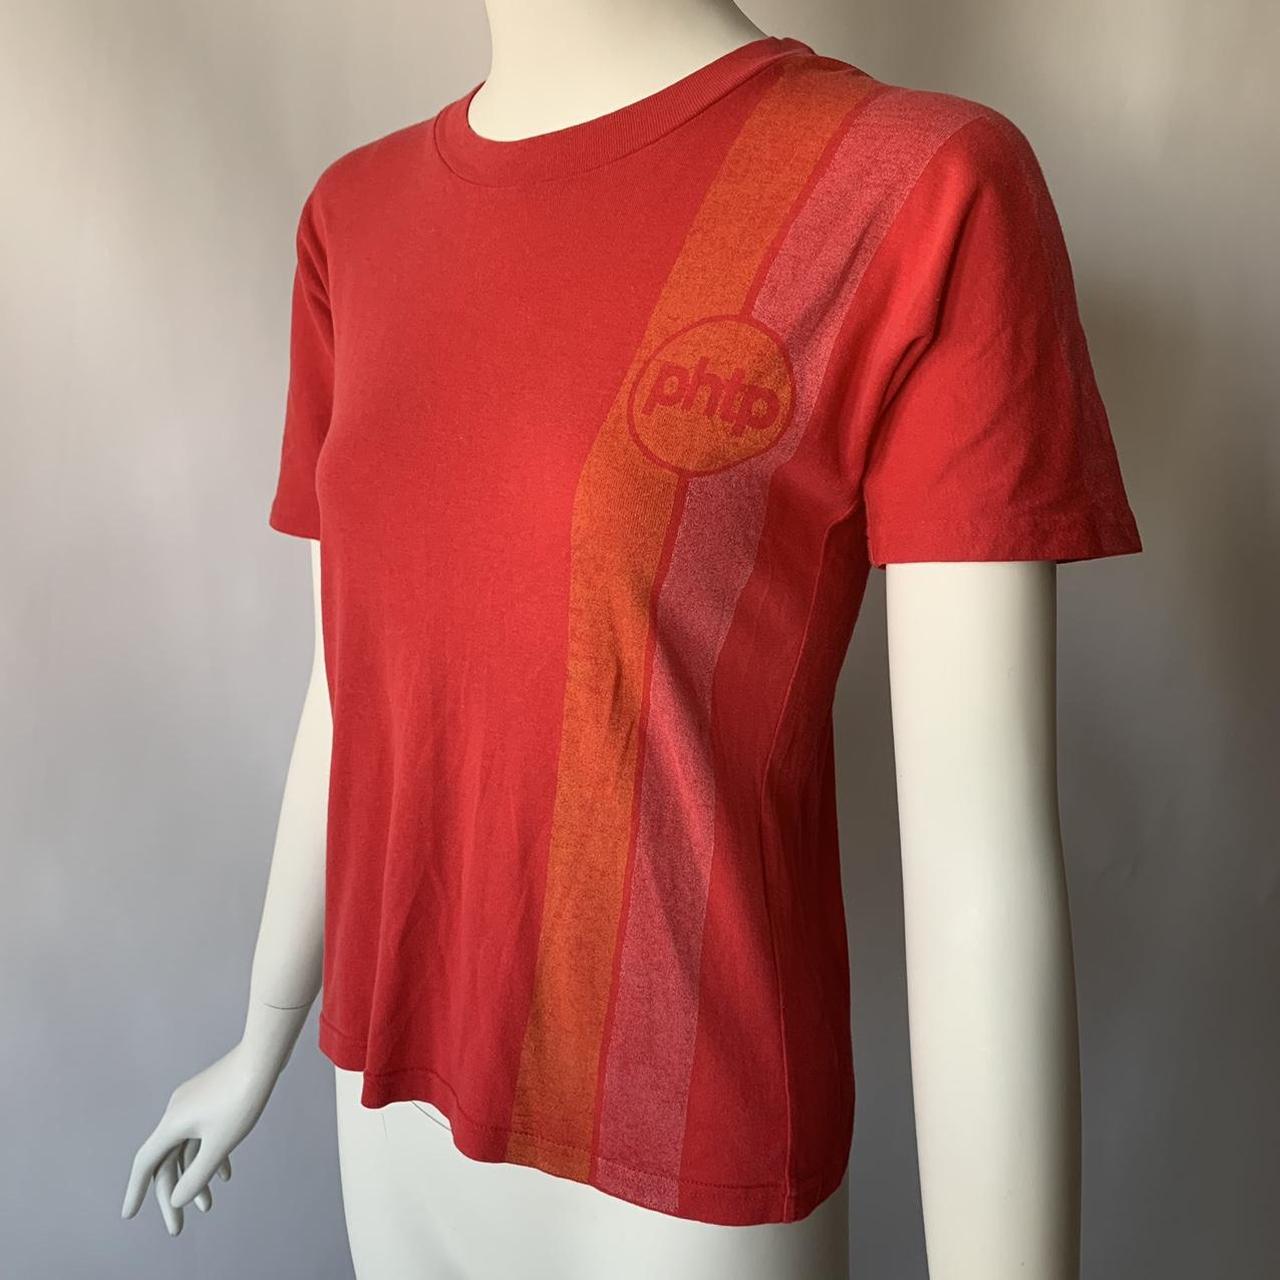 Product Image 2 - Red-orange-pink tshirt from phtp (people-have-the-power)